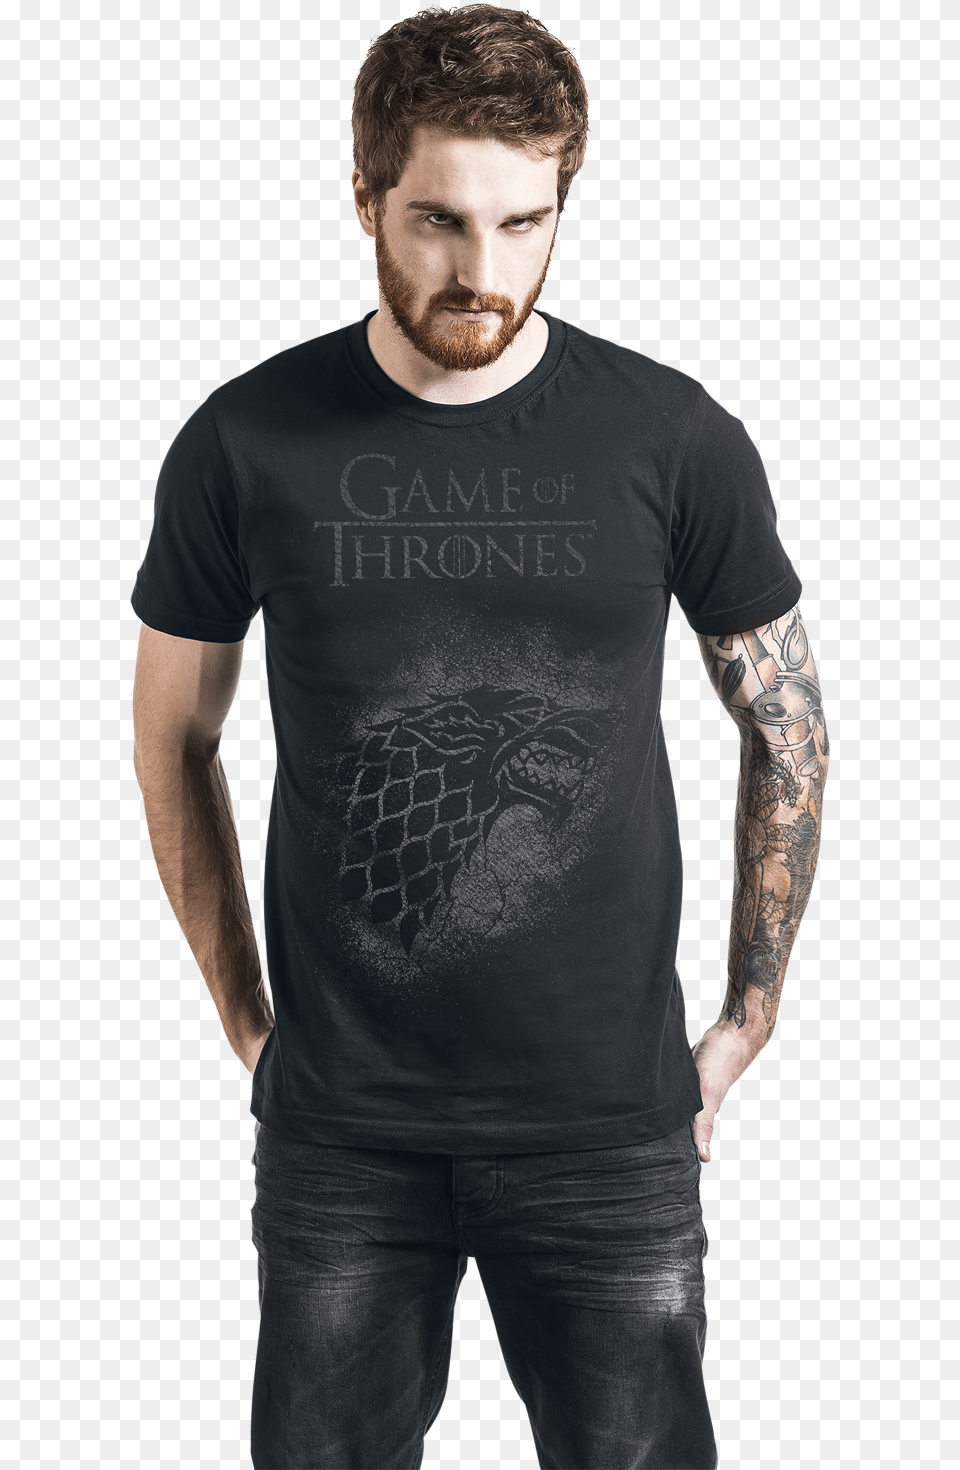 Official Black Game Of Thrones House Stark Sigil T Half Life Tricko, Tattoo, Clothing, T-shirt, Skin Png Image